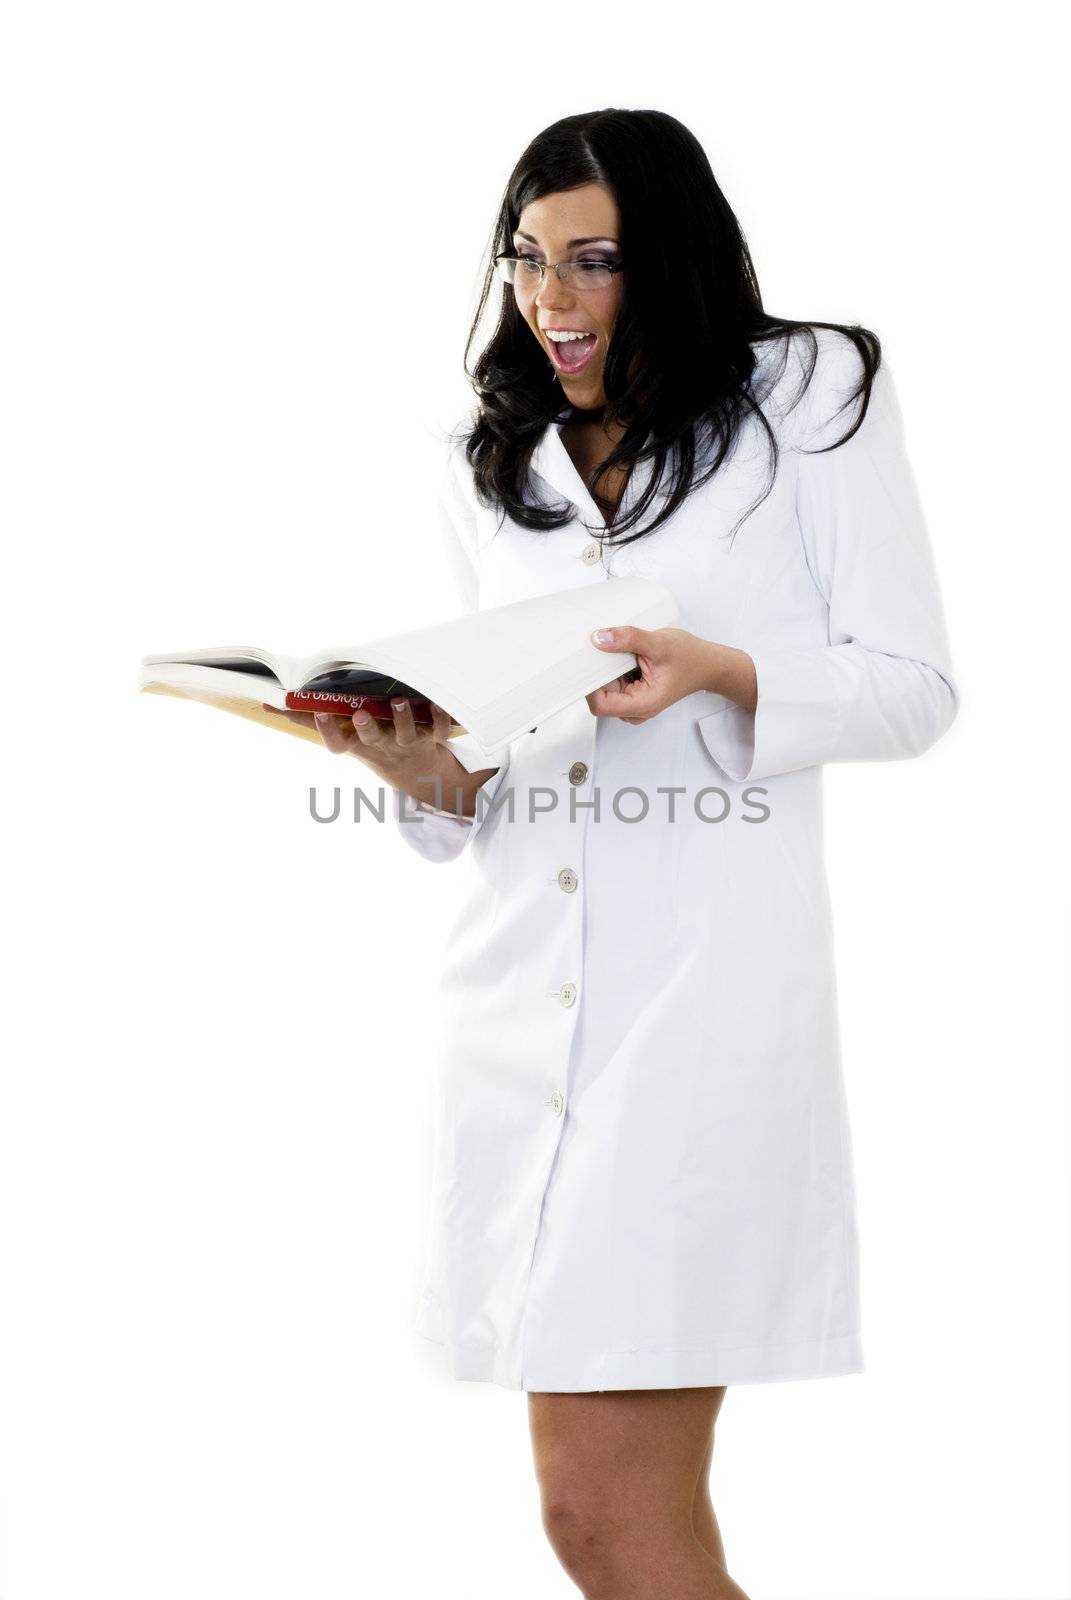 A beautiful model on a white isolated background wearing a lab coat and reading a book.